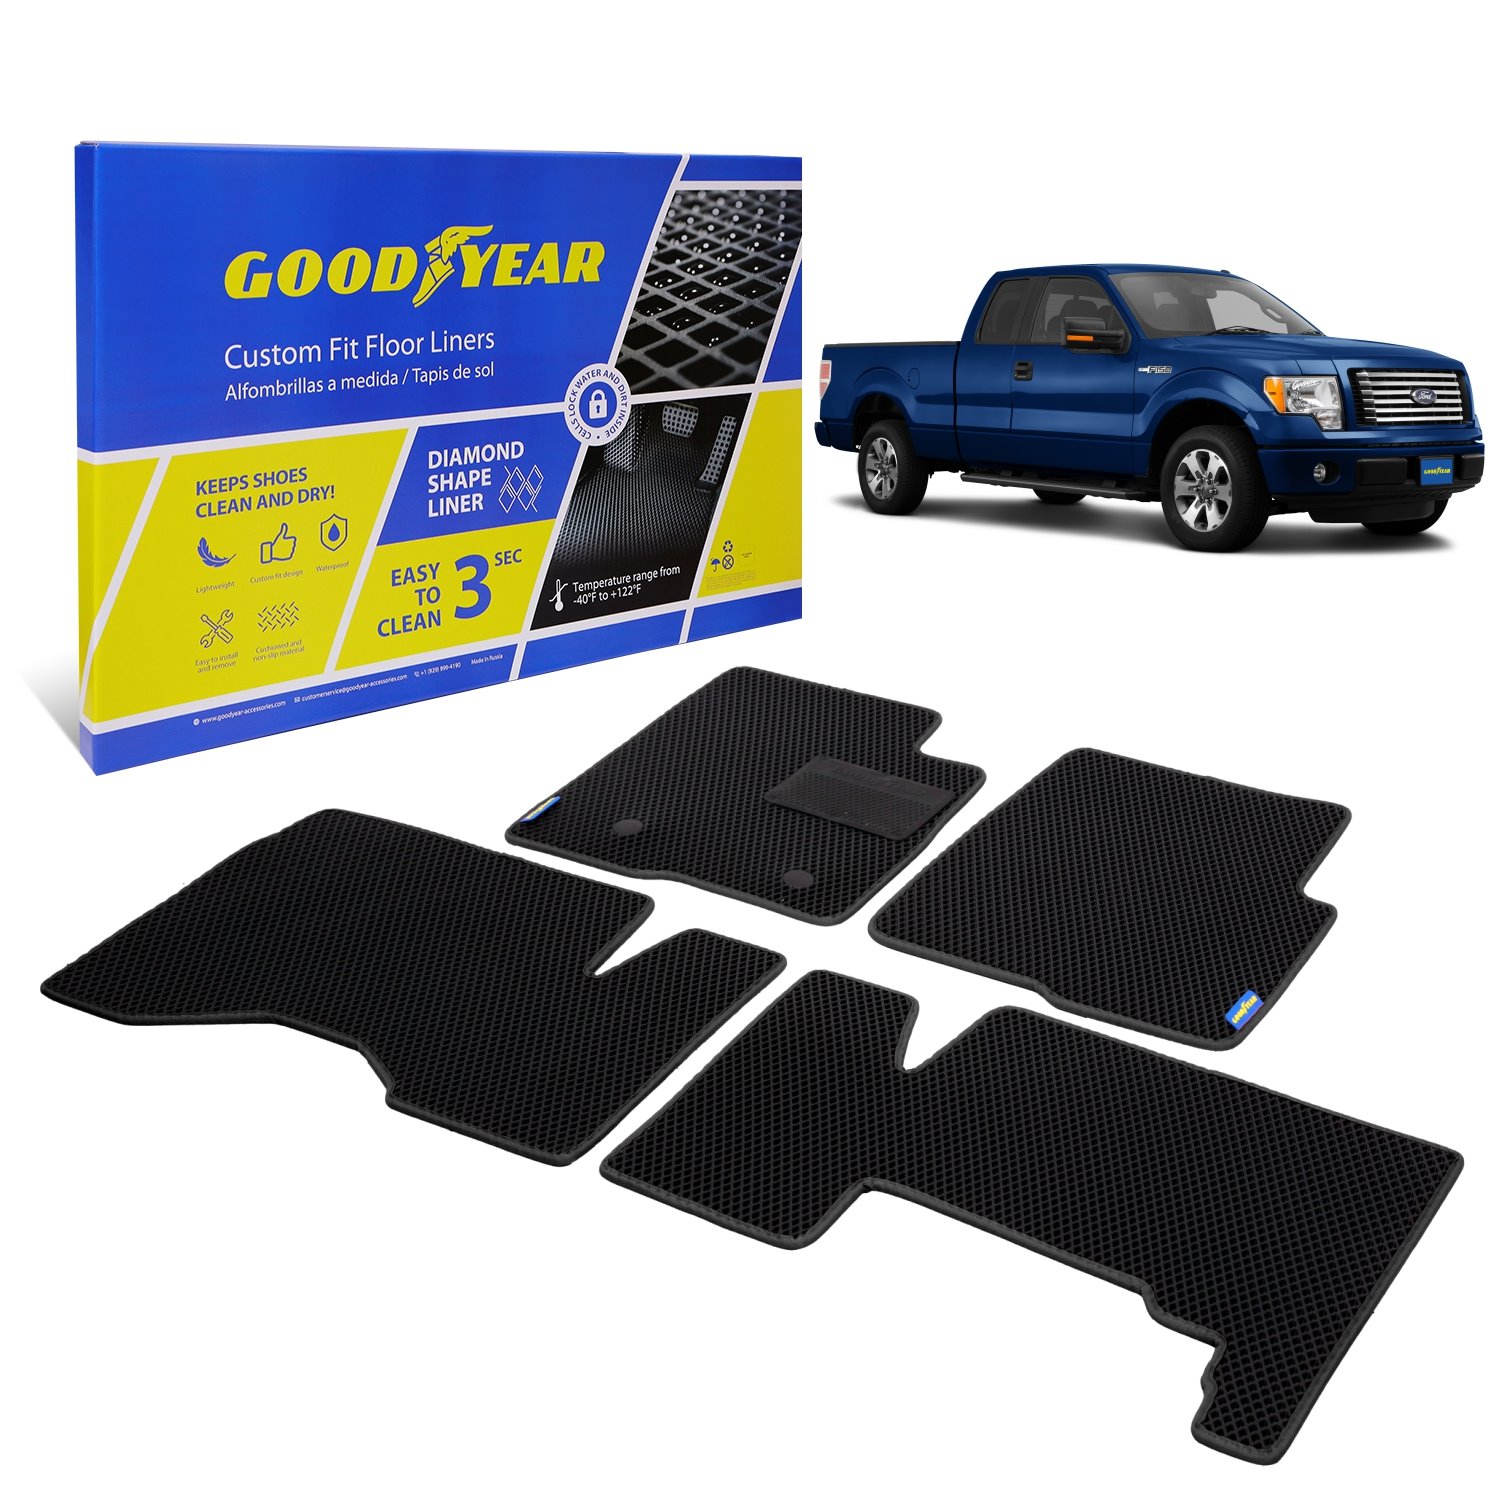 Goodyear Custom-Fit Floor Liners for 2009-2014 Ford F-150 SuperCab